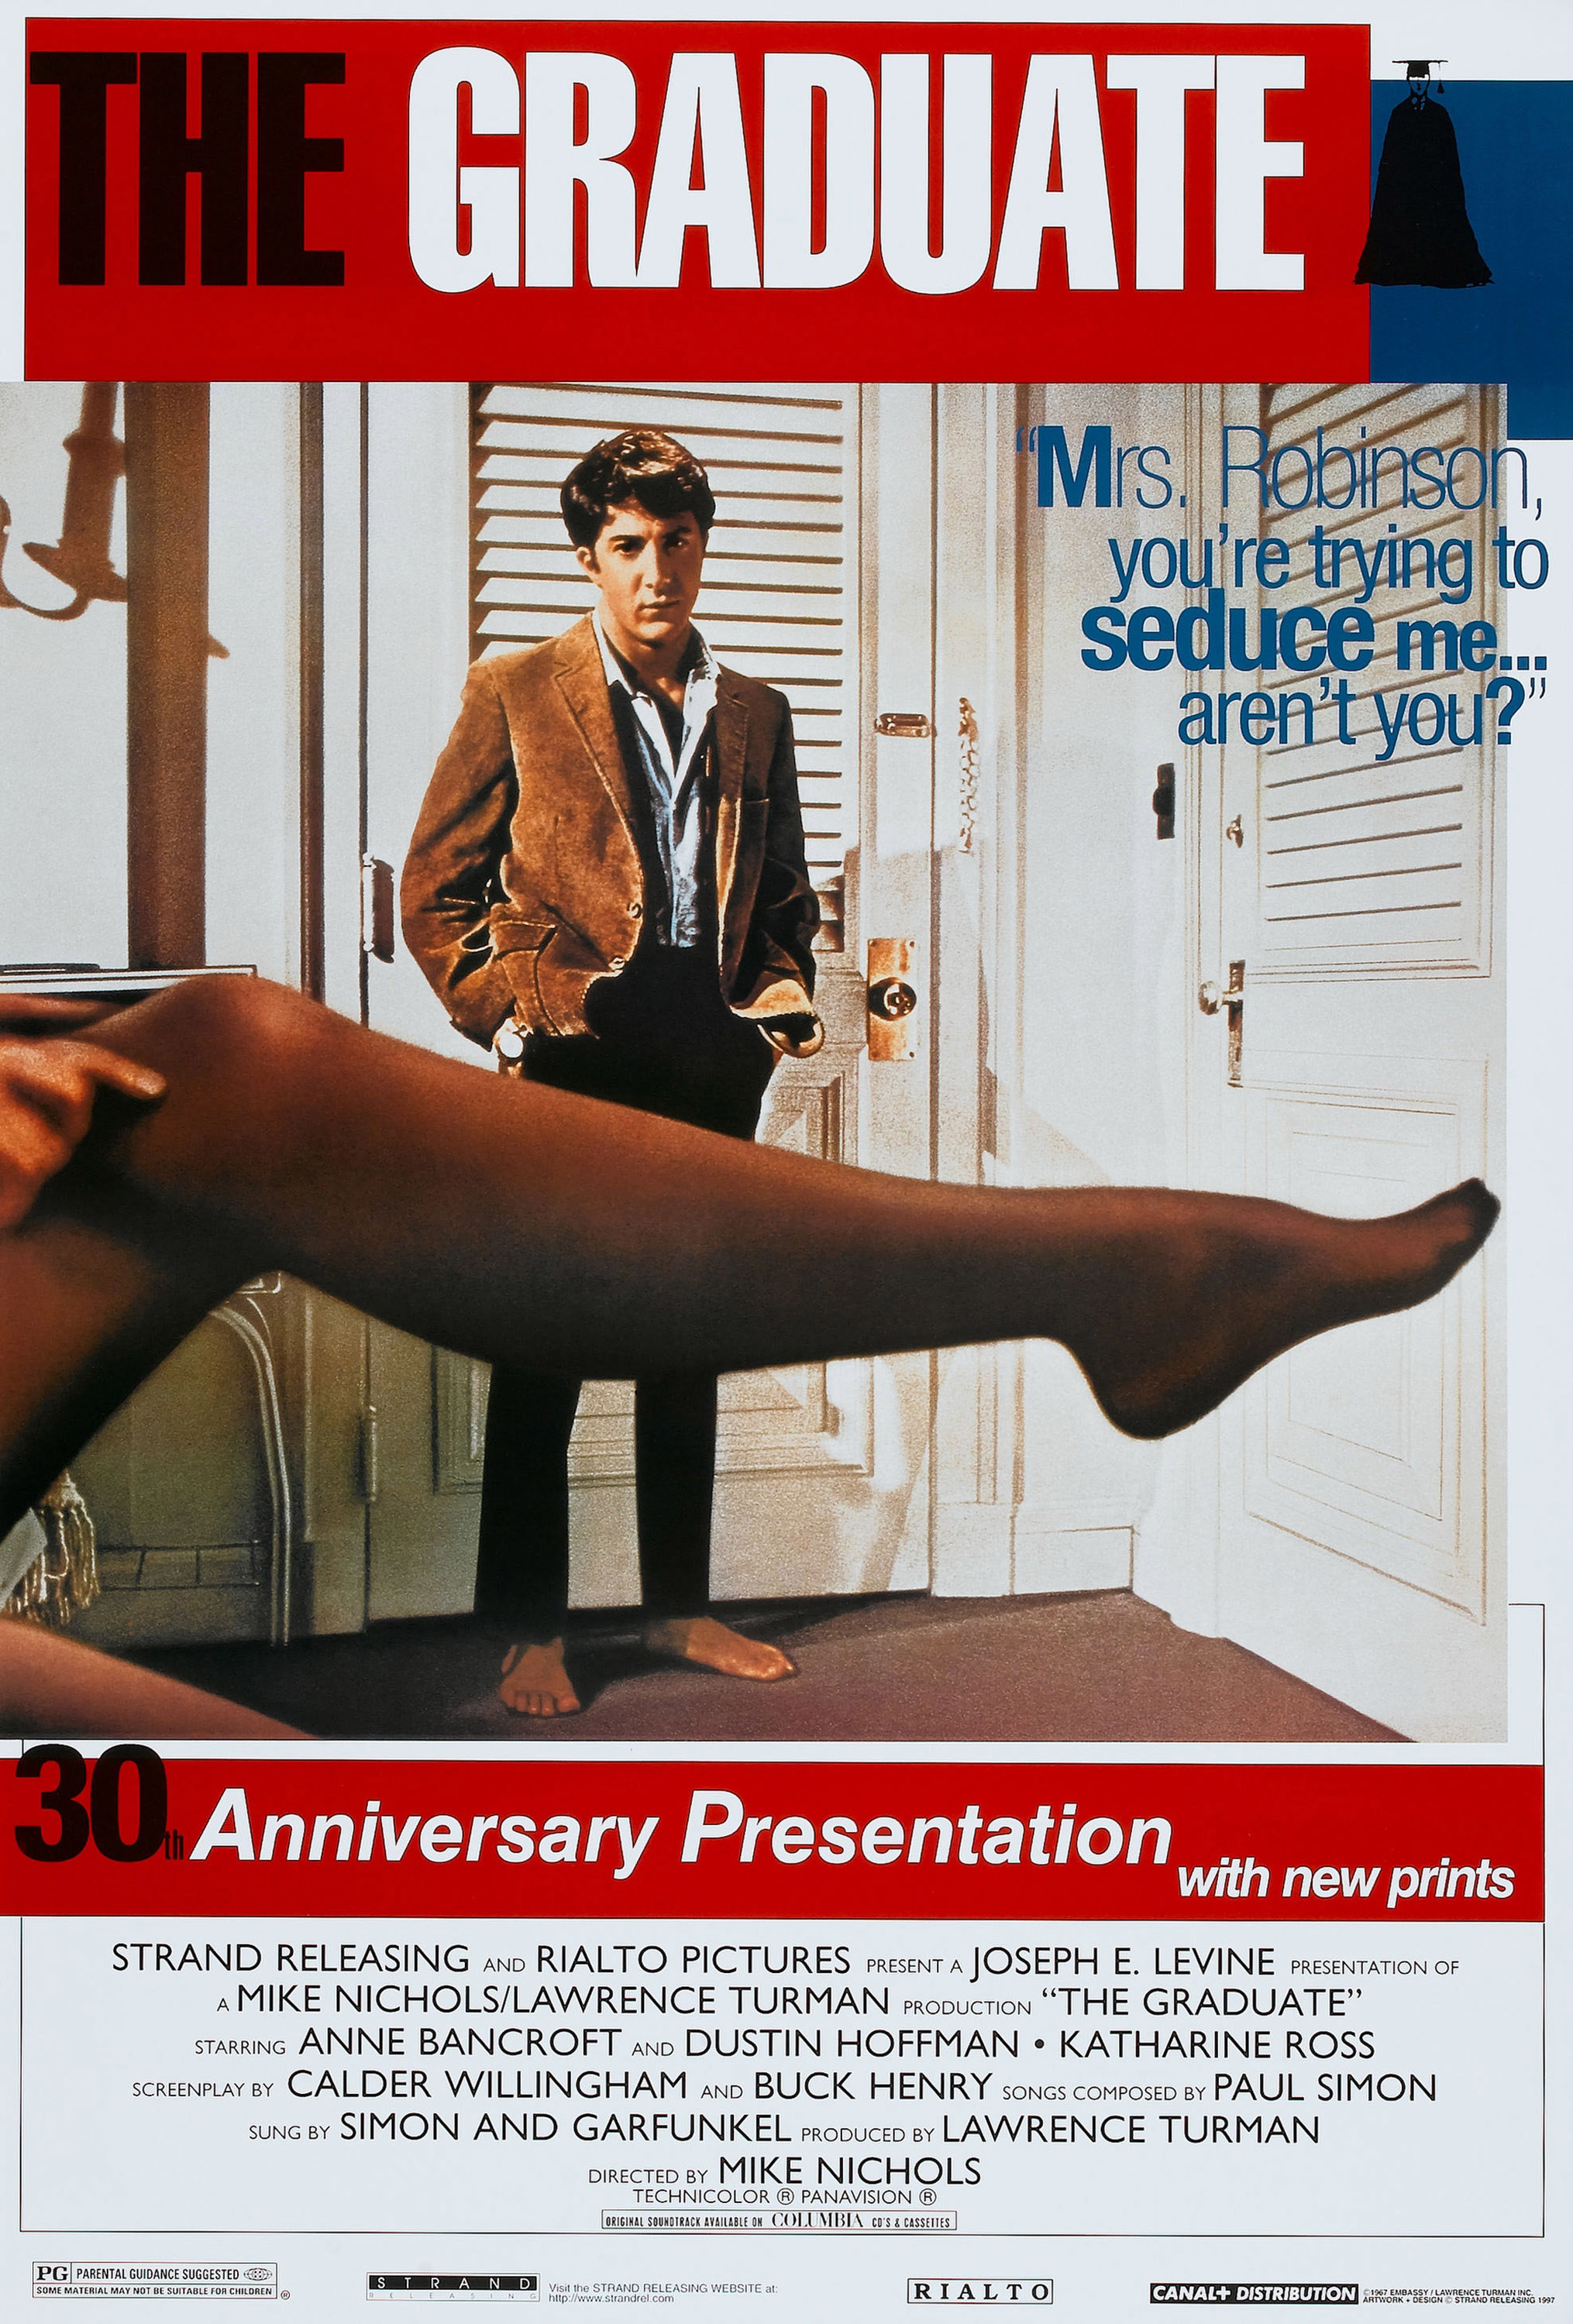 poster for the film with Mrs. Robinson pointing her leg out